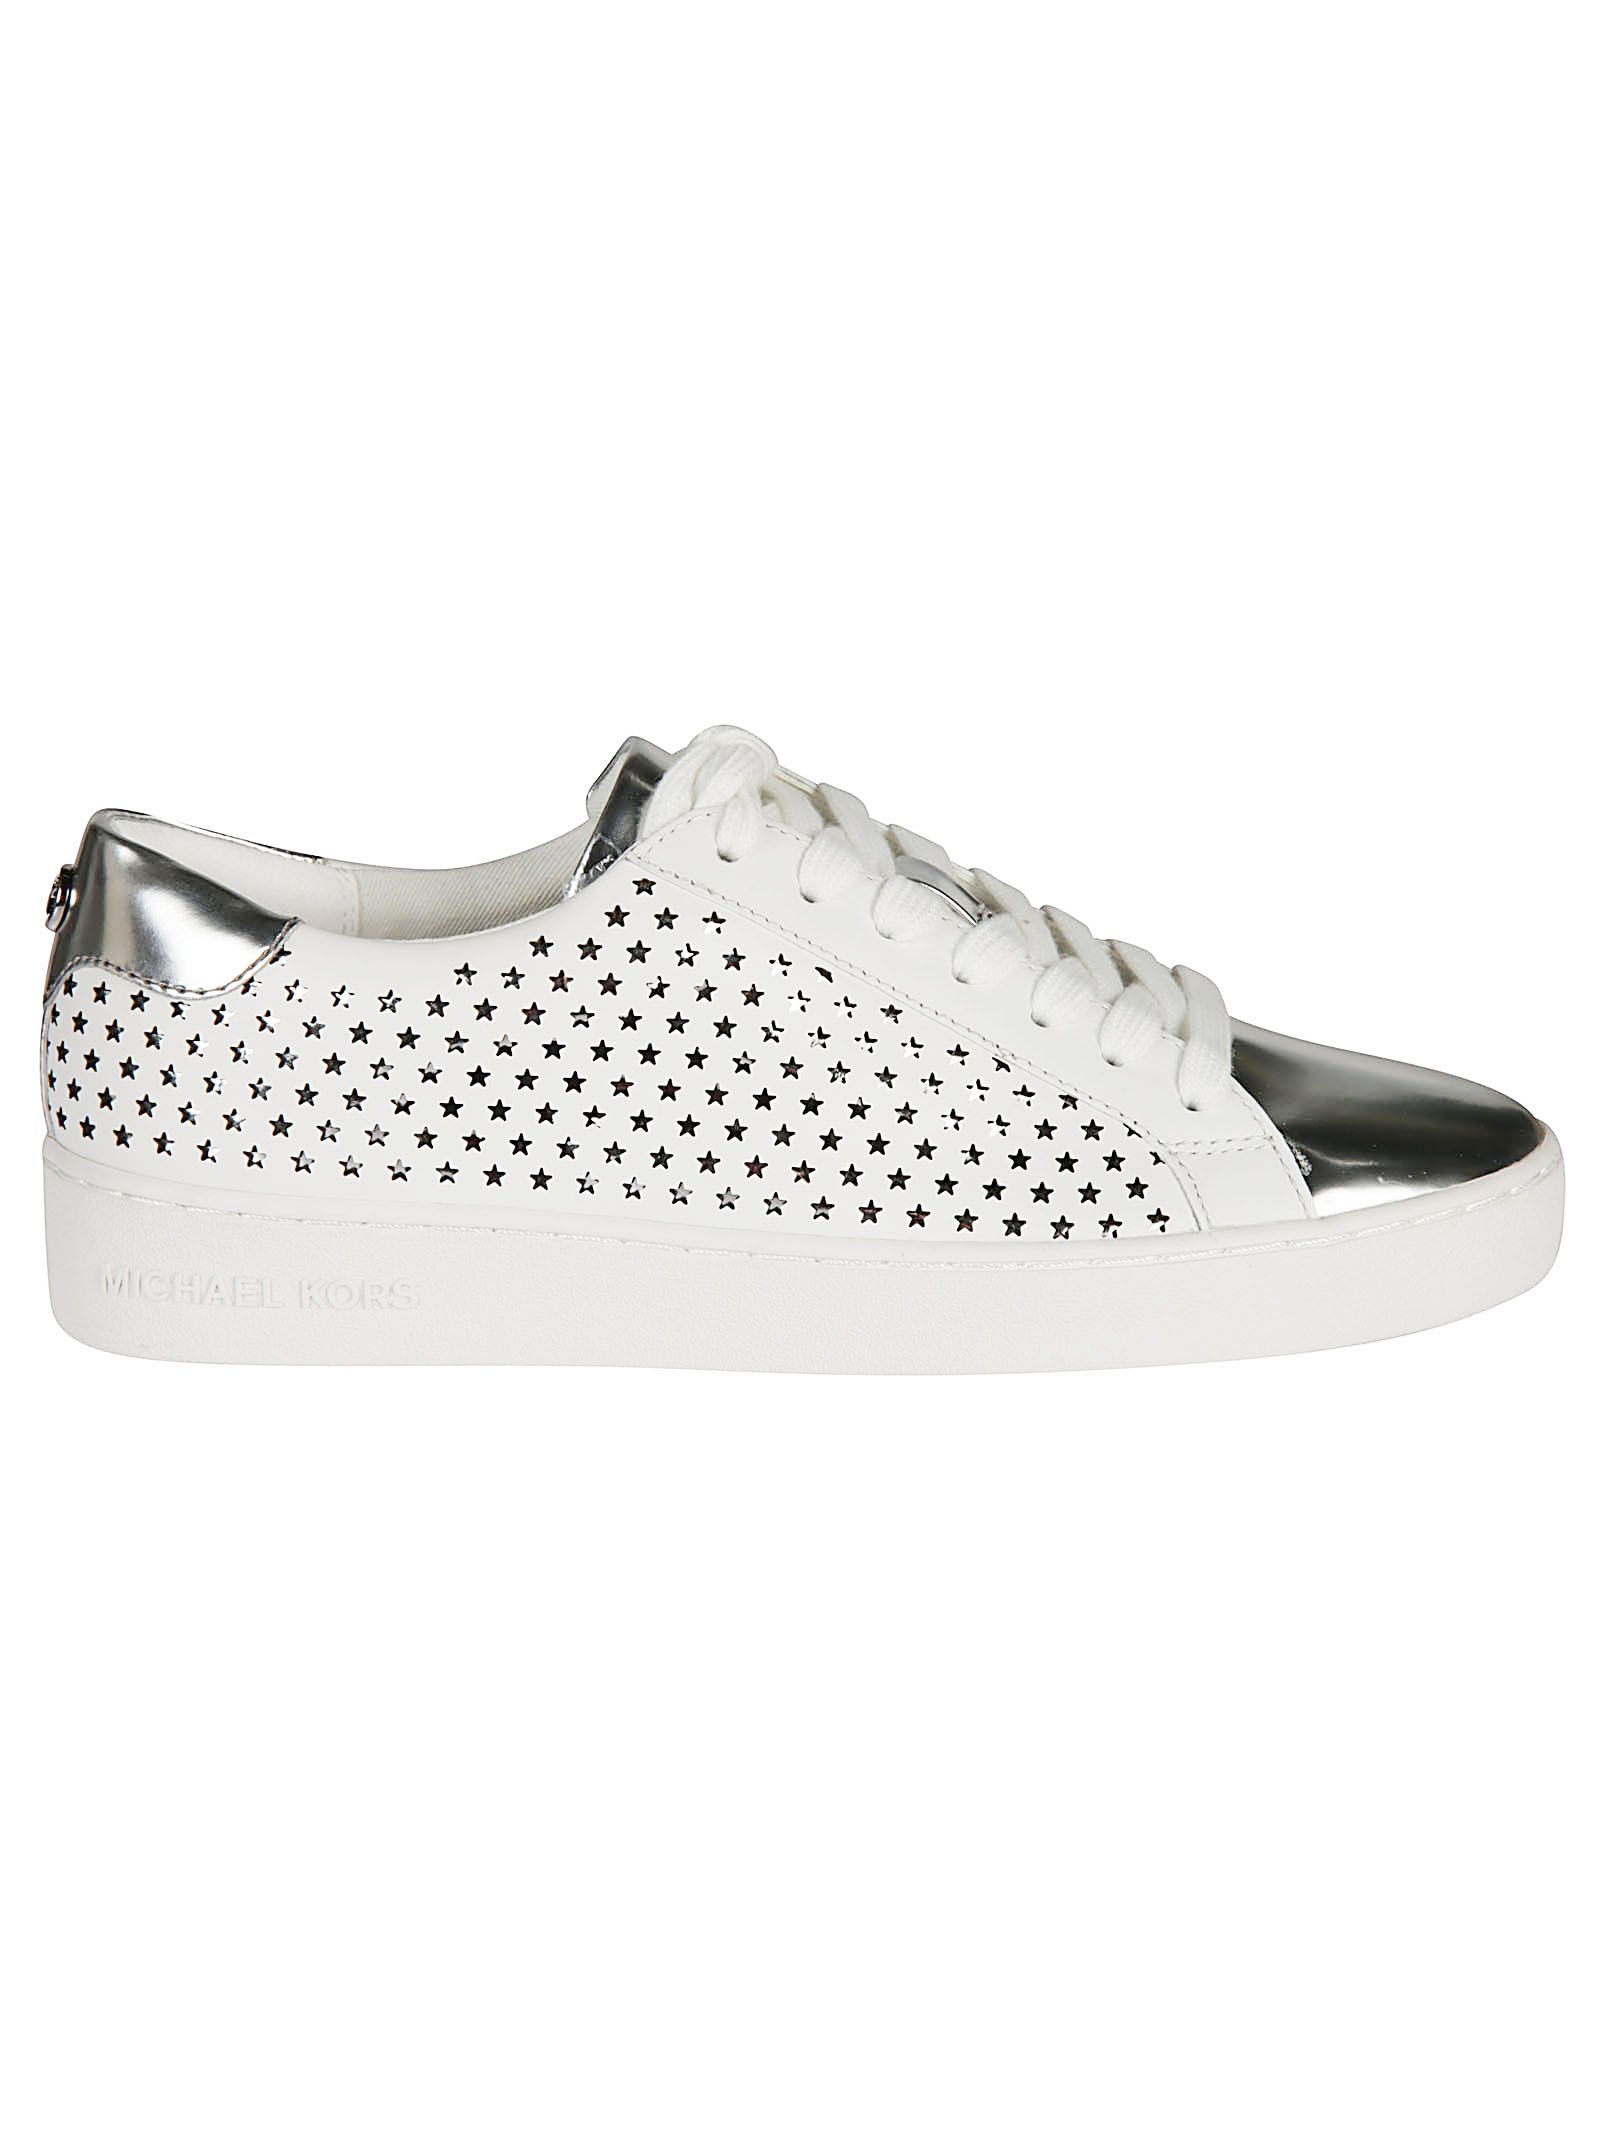 Michael Kors Michael Kors Irving Lace-up Sneakers - white - 10513230 ...